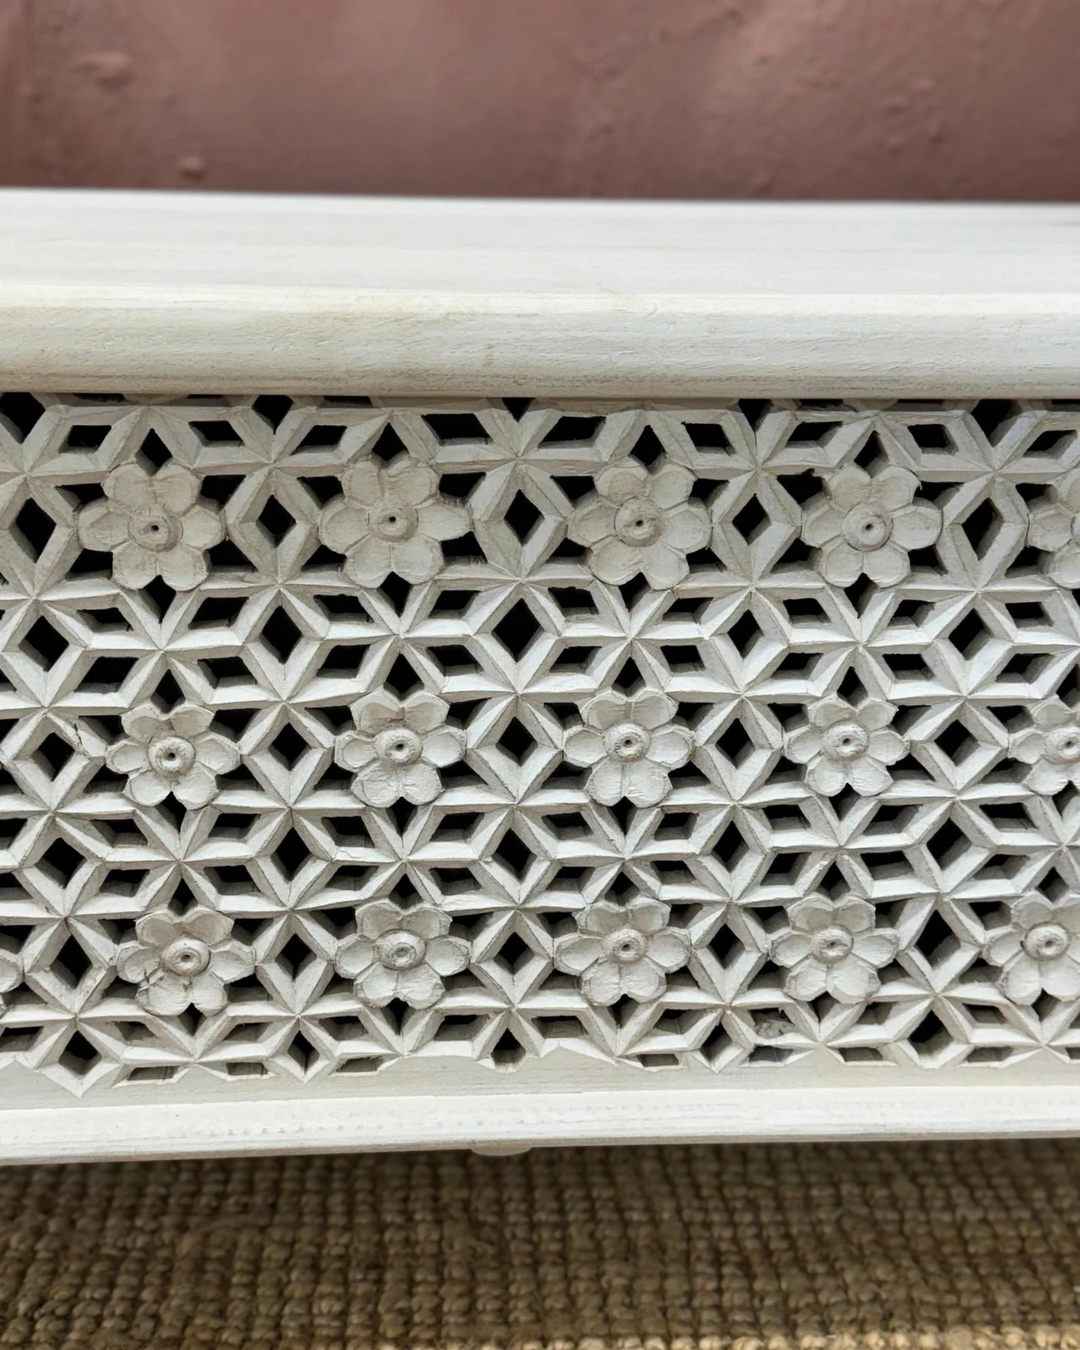 Hand Carved Whitewashed Storage Box with Petal Design